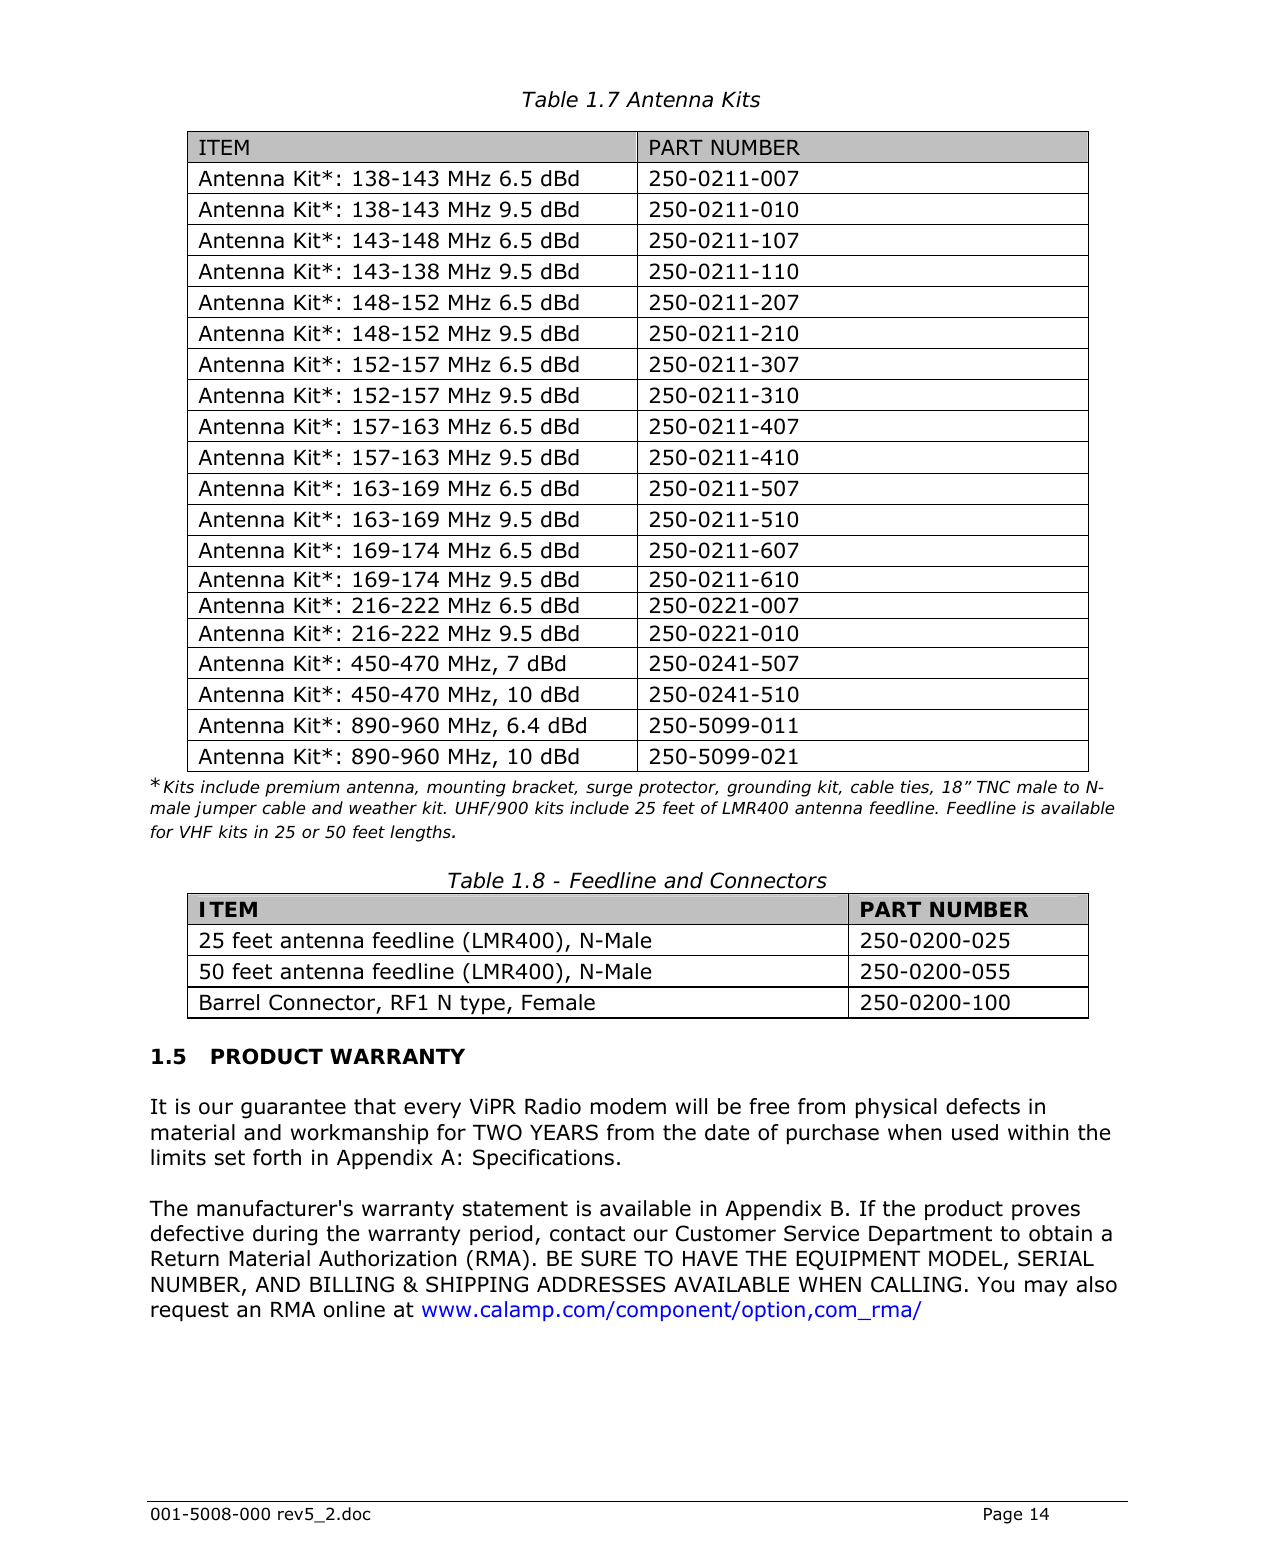  001-5008-000 rev5_2.doc    Page 14  Table 1.7 Antenna Kits  ITEM  PART NUMBER Antenna Kit*: 138-143 MHz 6.5 dBd  250-0211-007  Antenna Kit*: 138-143 MHz 9.5 dBd  250-0211-010  Antenna Kit*: 143-148 MHz 6.5 dBd  250-0211-107  Antenna Kit*: 143-138 MHz 9.5 dBd  250-0211-110  Antenna Kit*: 148-152 MHz 6.5 dBd  250-0211-207  Antenna Kit*: 148-152 MHz 9.5 dBd  250-0211-210  Antenna Kit*: 152-157 MHz 6.5 dBd  250-0211-307  Antenna Kit*: 152-157 MHz 9.5 dBd  250-0211-310  Antenna Kit*: 157-163 MHz 6.5 dBd  250-0211-407  Antenna Kit*: 157-163 MHz 9.5 dBd  250-0211-410  Antenna Kit*: 163-169 MHz 6.5 dBd  250-0211-507  Antenna Kit*: 163-169 MHz 9.5 dBd  250-0211-510  Antenna Kit*: 169-174 MHz 6.5 dBd  250-0211-607  Antenna Kit*: 169-174 MHz 9.5 dBd  250-0211-610  Antenna Kit*: 216-222 MHz 6.5 dBd  250-0221-007 Antenna Kit*: 216-222 MHz 9.5 dBd  250-0221-010 Antenna Kit*: 450-470 MHz, 7 dBd  250-0241-507  Antenna Kit*: 450-470 MHz, 10 dBd   250-0241-510  Antenna Kit*: 890-960 MHz, 6.4 dBd  250-5099-011 Antenna Kit*: 890-960 MHz, 10 dBd  250-5099-021 *Kits include premium antenna, mounting bracket, surge protector, grounding kit, cable ties, 18” TNC male to N-male jumper cable and weather kit. UHF/900 kits include 25 feet of LMR400 antenna feedline. Feedline is available for VHF kits in 25 or 50 feet lengths. Table 1.8 - Feedline and Connectors ITEM  PART NUMBER 25 feet antenna feedline (LMR400), N-Male  250-0200-025 50 feet antenna feedline (LMR400), N-Male  250-0200-055 Barrel Connector, RF1 N type, Female  250-0200-100 1.5 PRODUCT WARRANTY It is our guarantee that every ViPR Radio modem will be free from physical defects in material and workmanship for TWO YEARS from the date of purchase when used within the limits set forth in Appendix A: Specifications.   The manufacturer&apos;s warranty statement is available in Appendix B. If the product proves defective during the warranty period, contact our Customer Service Department to obtain a Return Material Authorization (RMA). BE SURE TO HAVE THE EQUIPMENT MODEL, SERIAL NUMBER, AND BILLING &amp; SHIPPING ADDRESSES AVAILABLE WHEN CALLING. You may also request an RMA online at www.calamp.com/component/option,com_rma/        